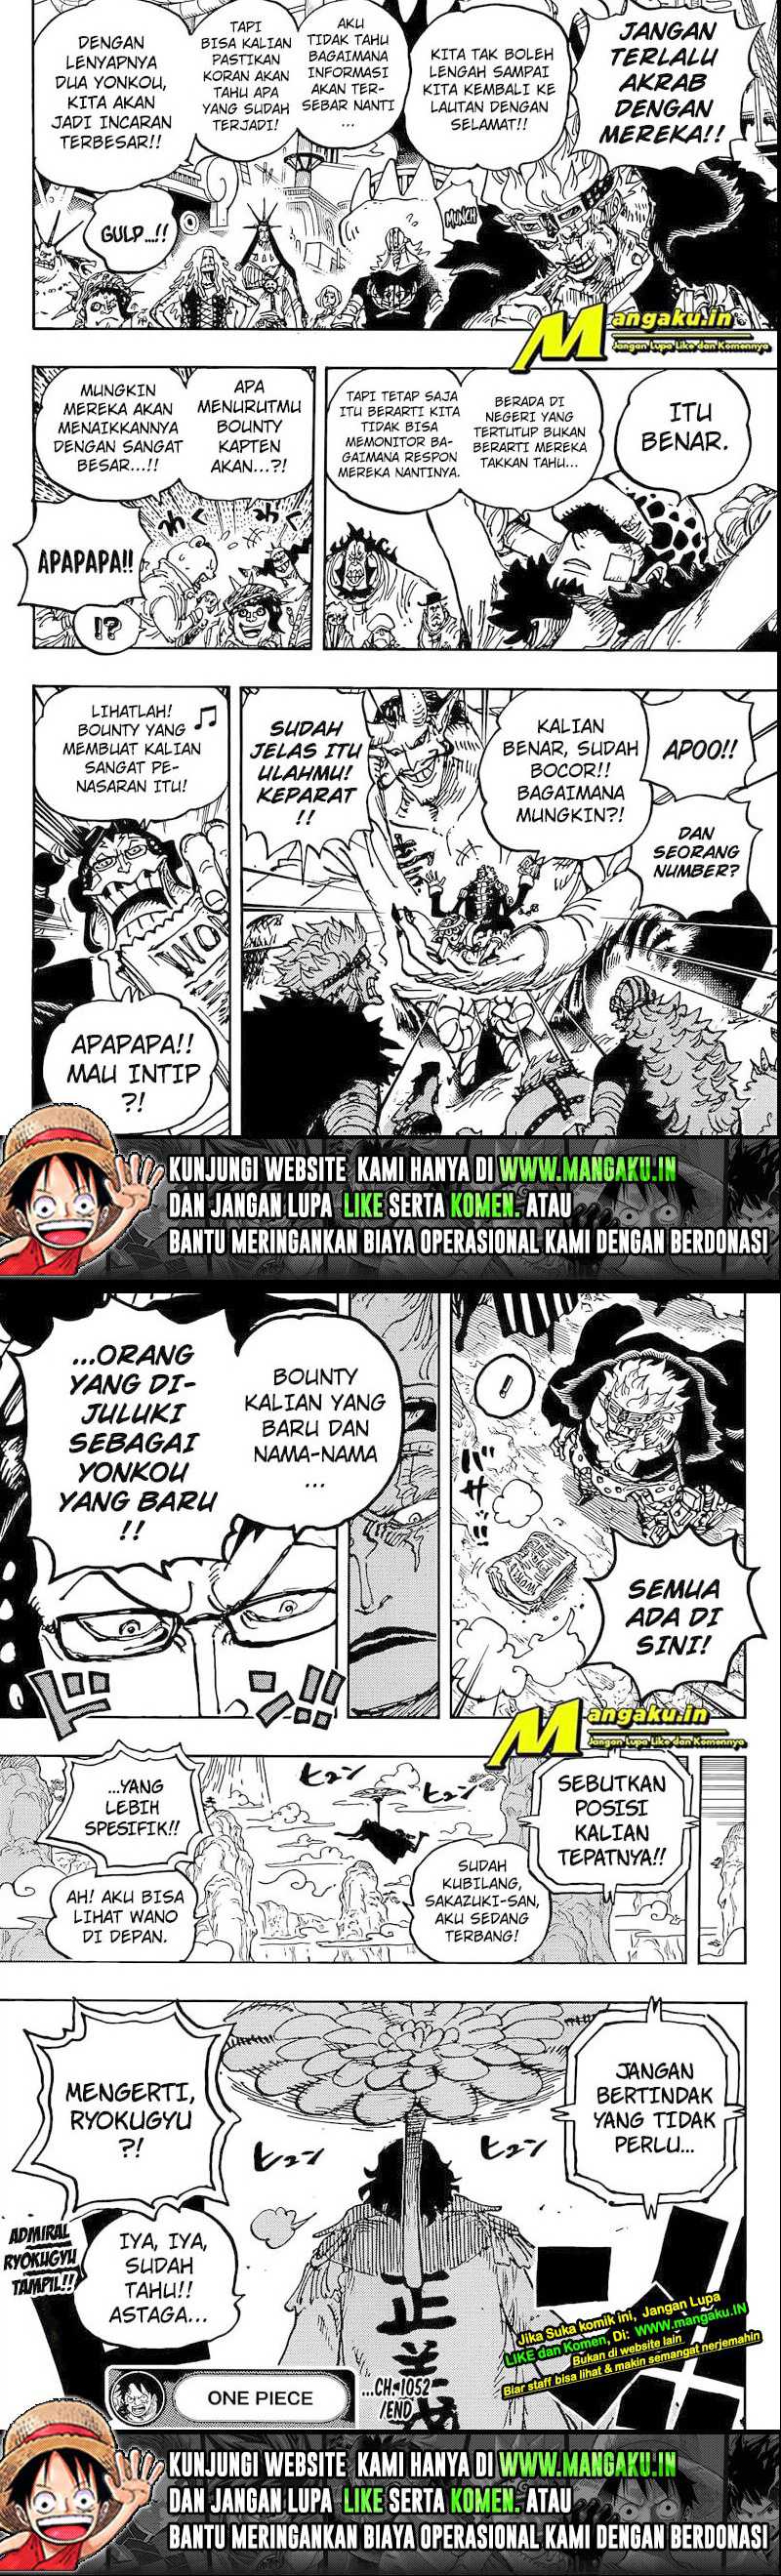 One Piece Chapter 1052 hq Image 4